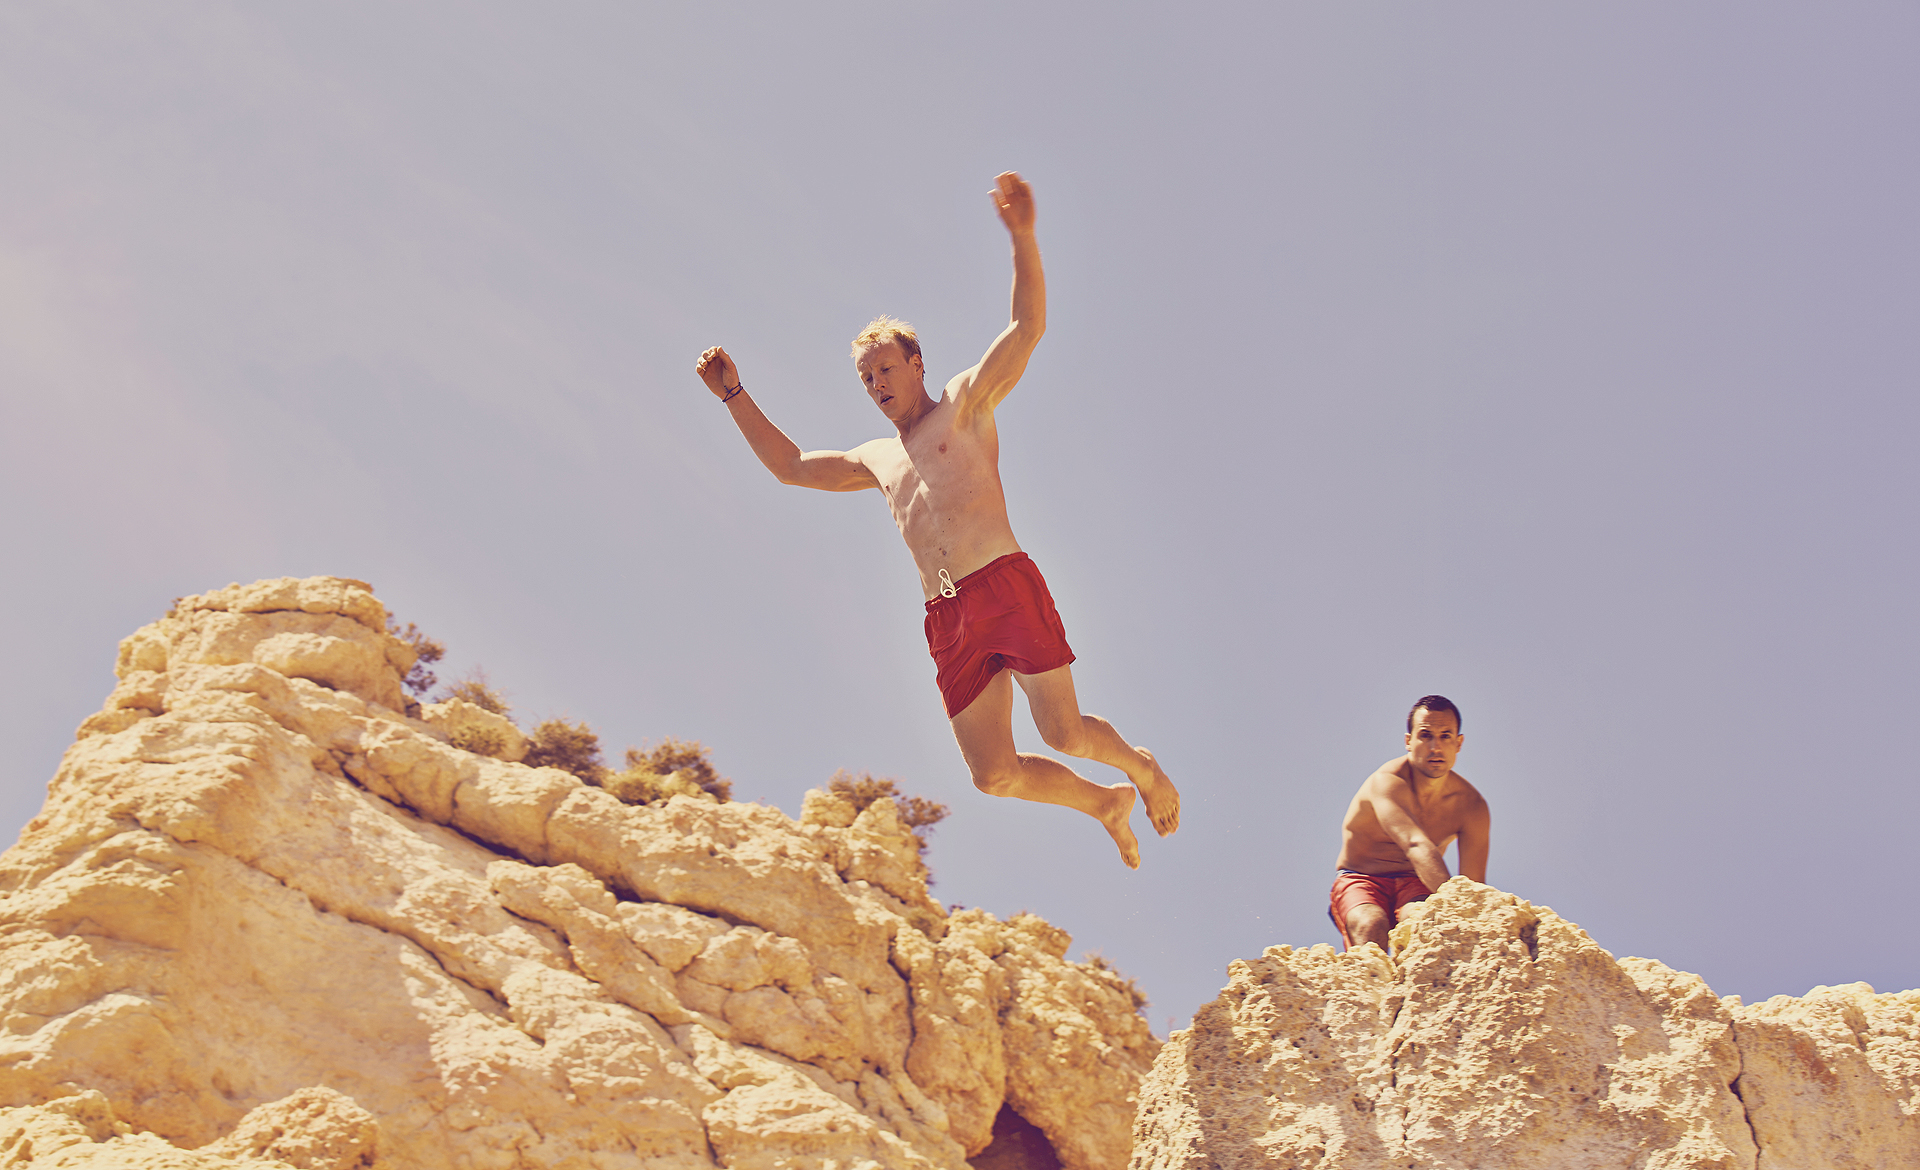 Cliff Jumping in Carvoeiro, Portugal